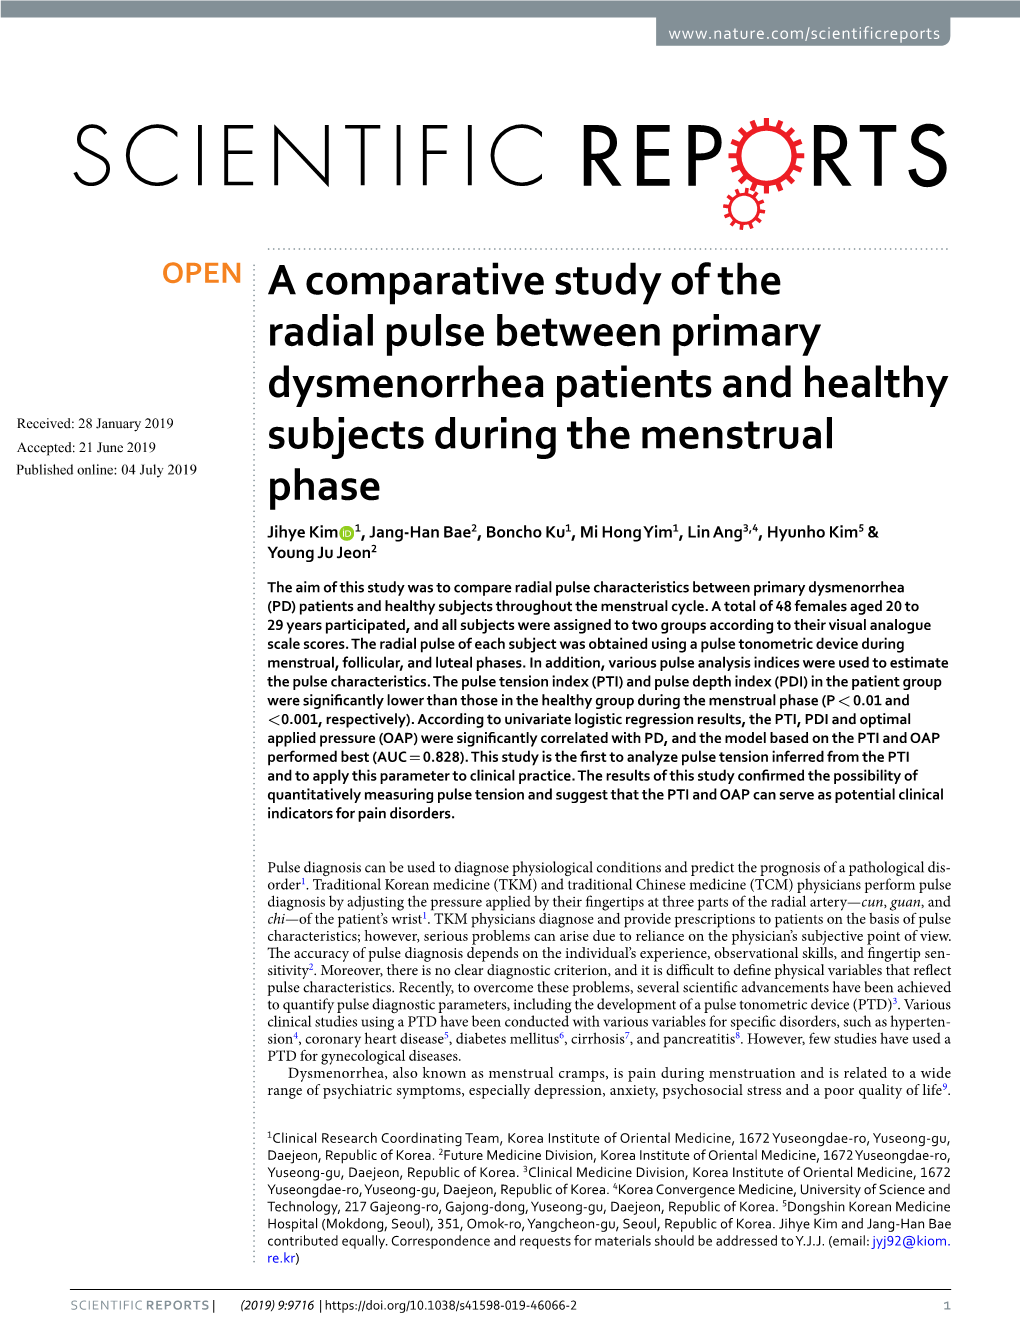 A Comparative Study of the Radial Pulse Between Primary